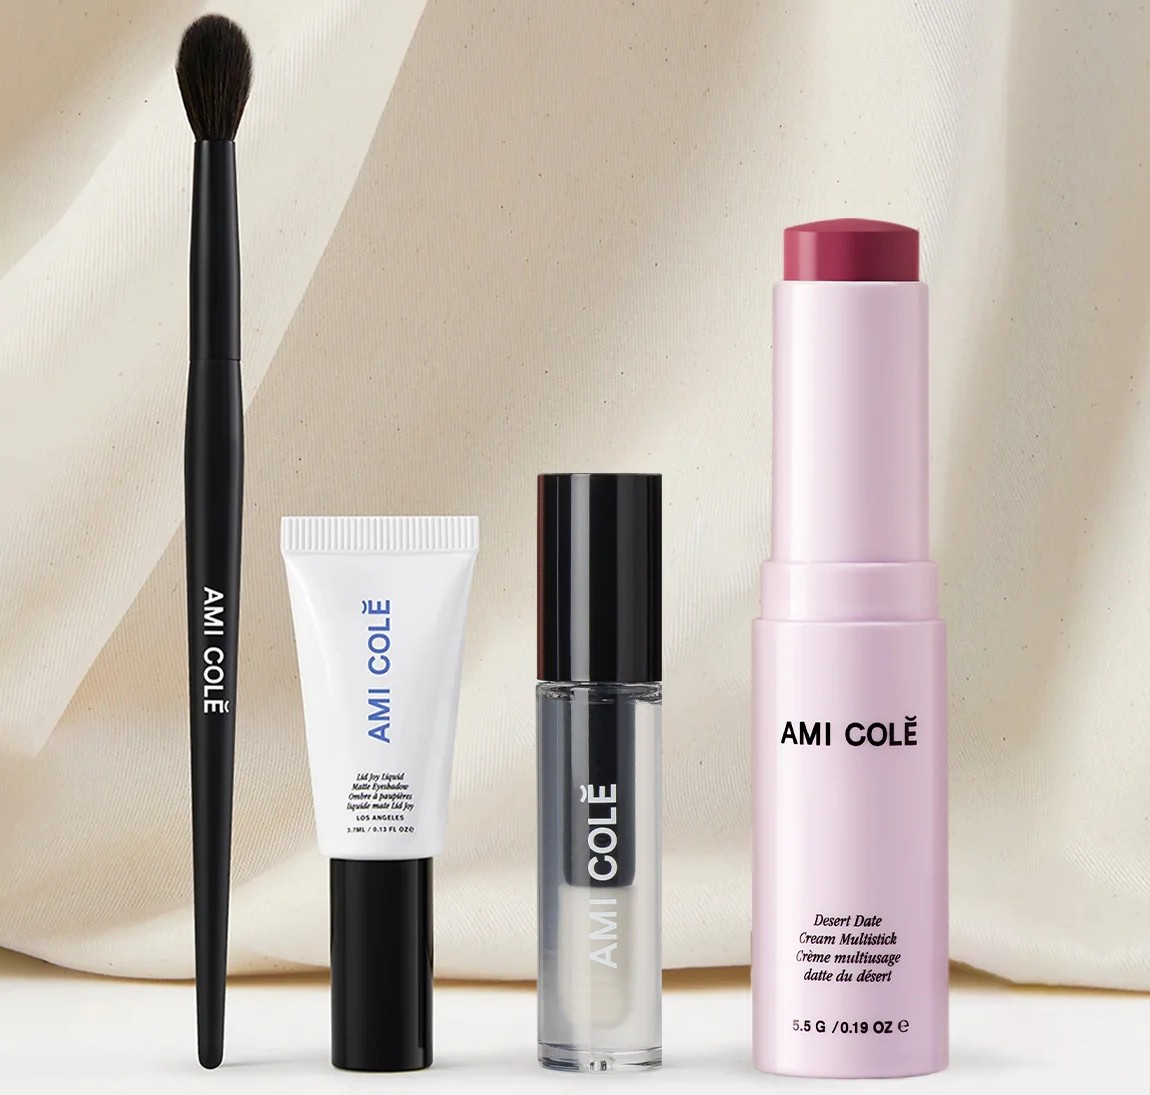 These Ami Colé Gift Sets Make the Perfect Holiday Gifts